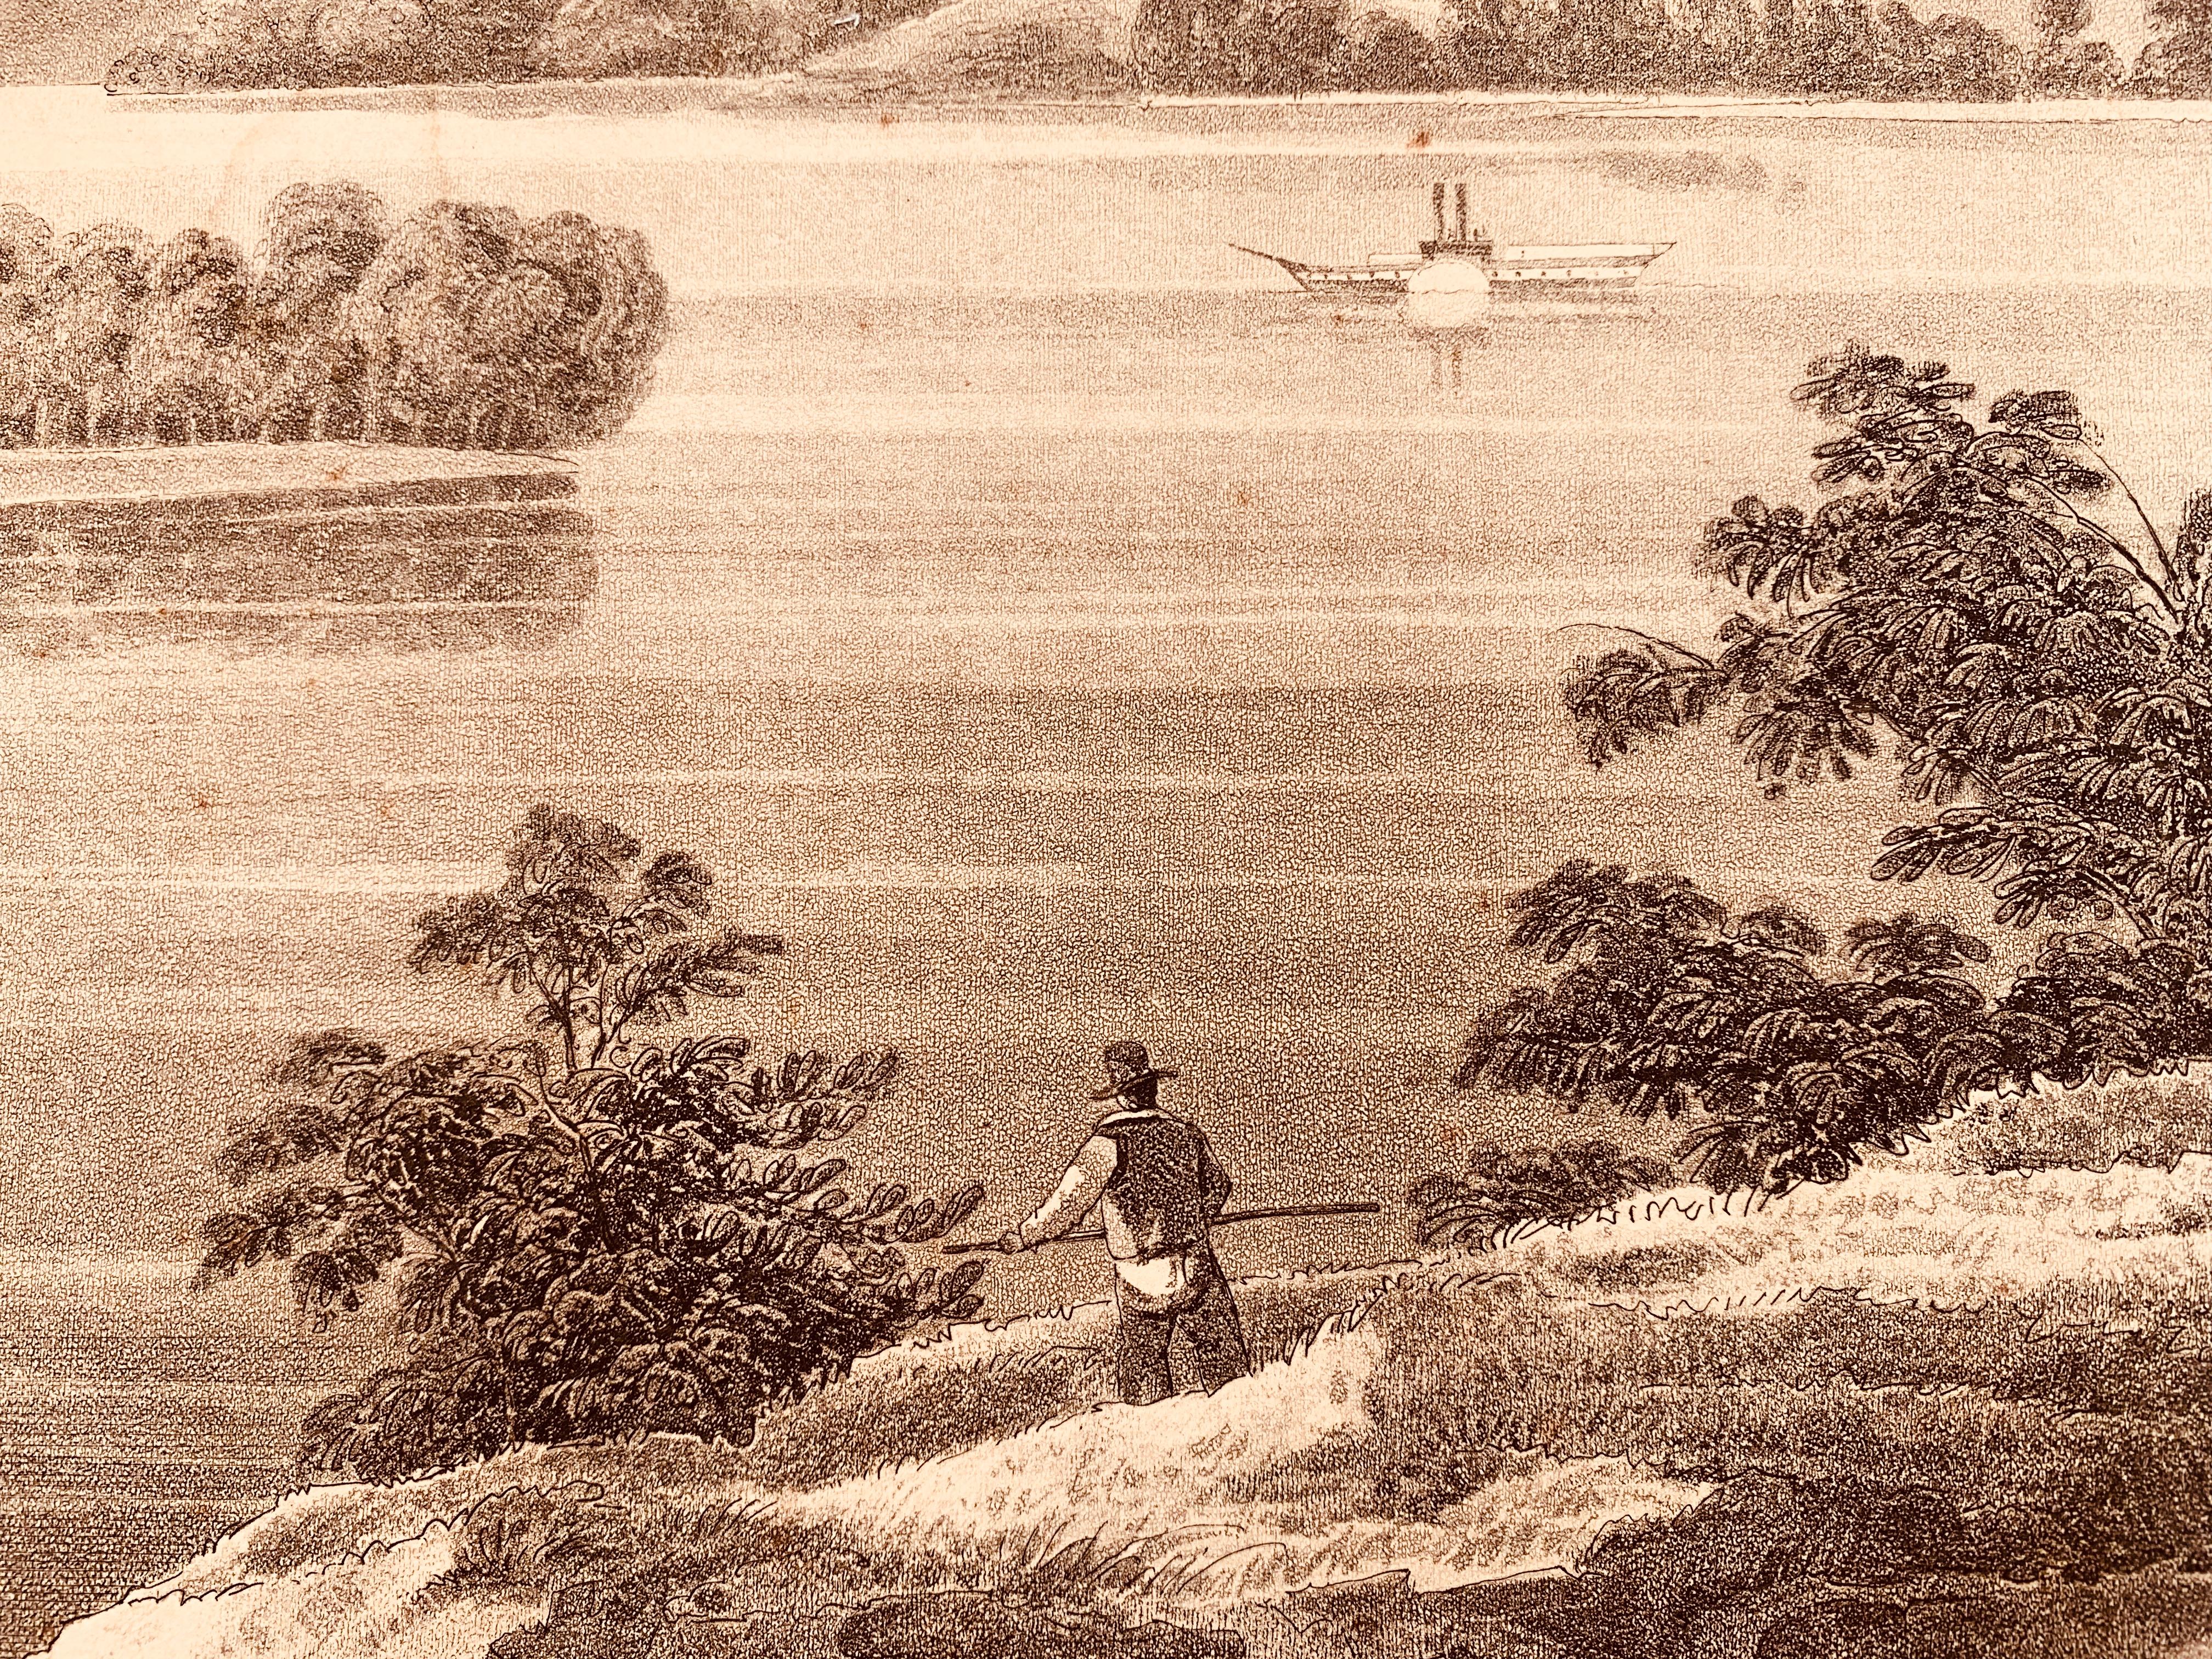 View from Fishkill Looking To West-Point - Print by William Guy Wall